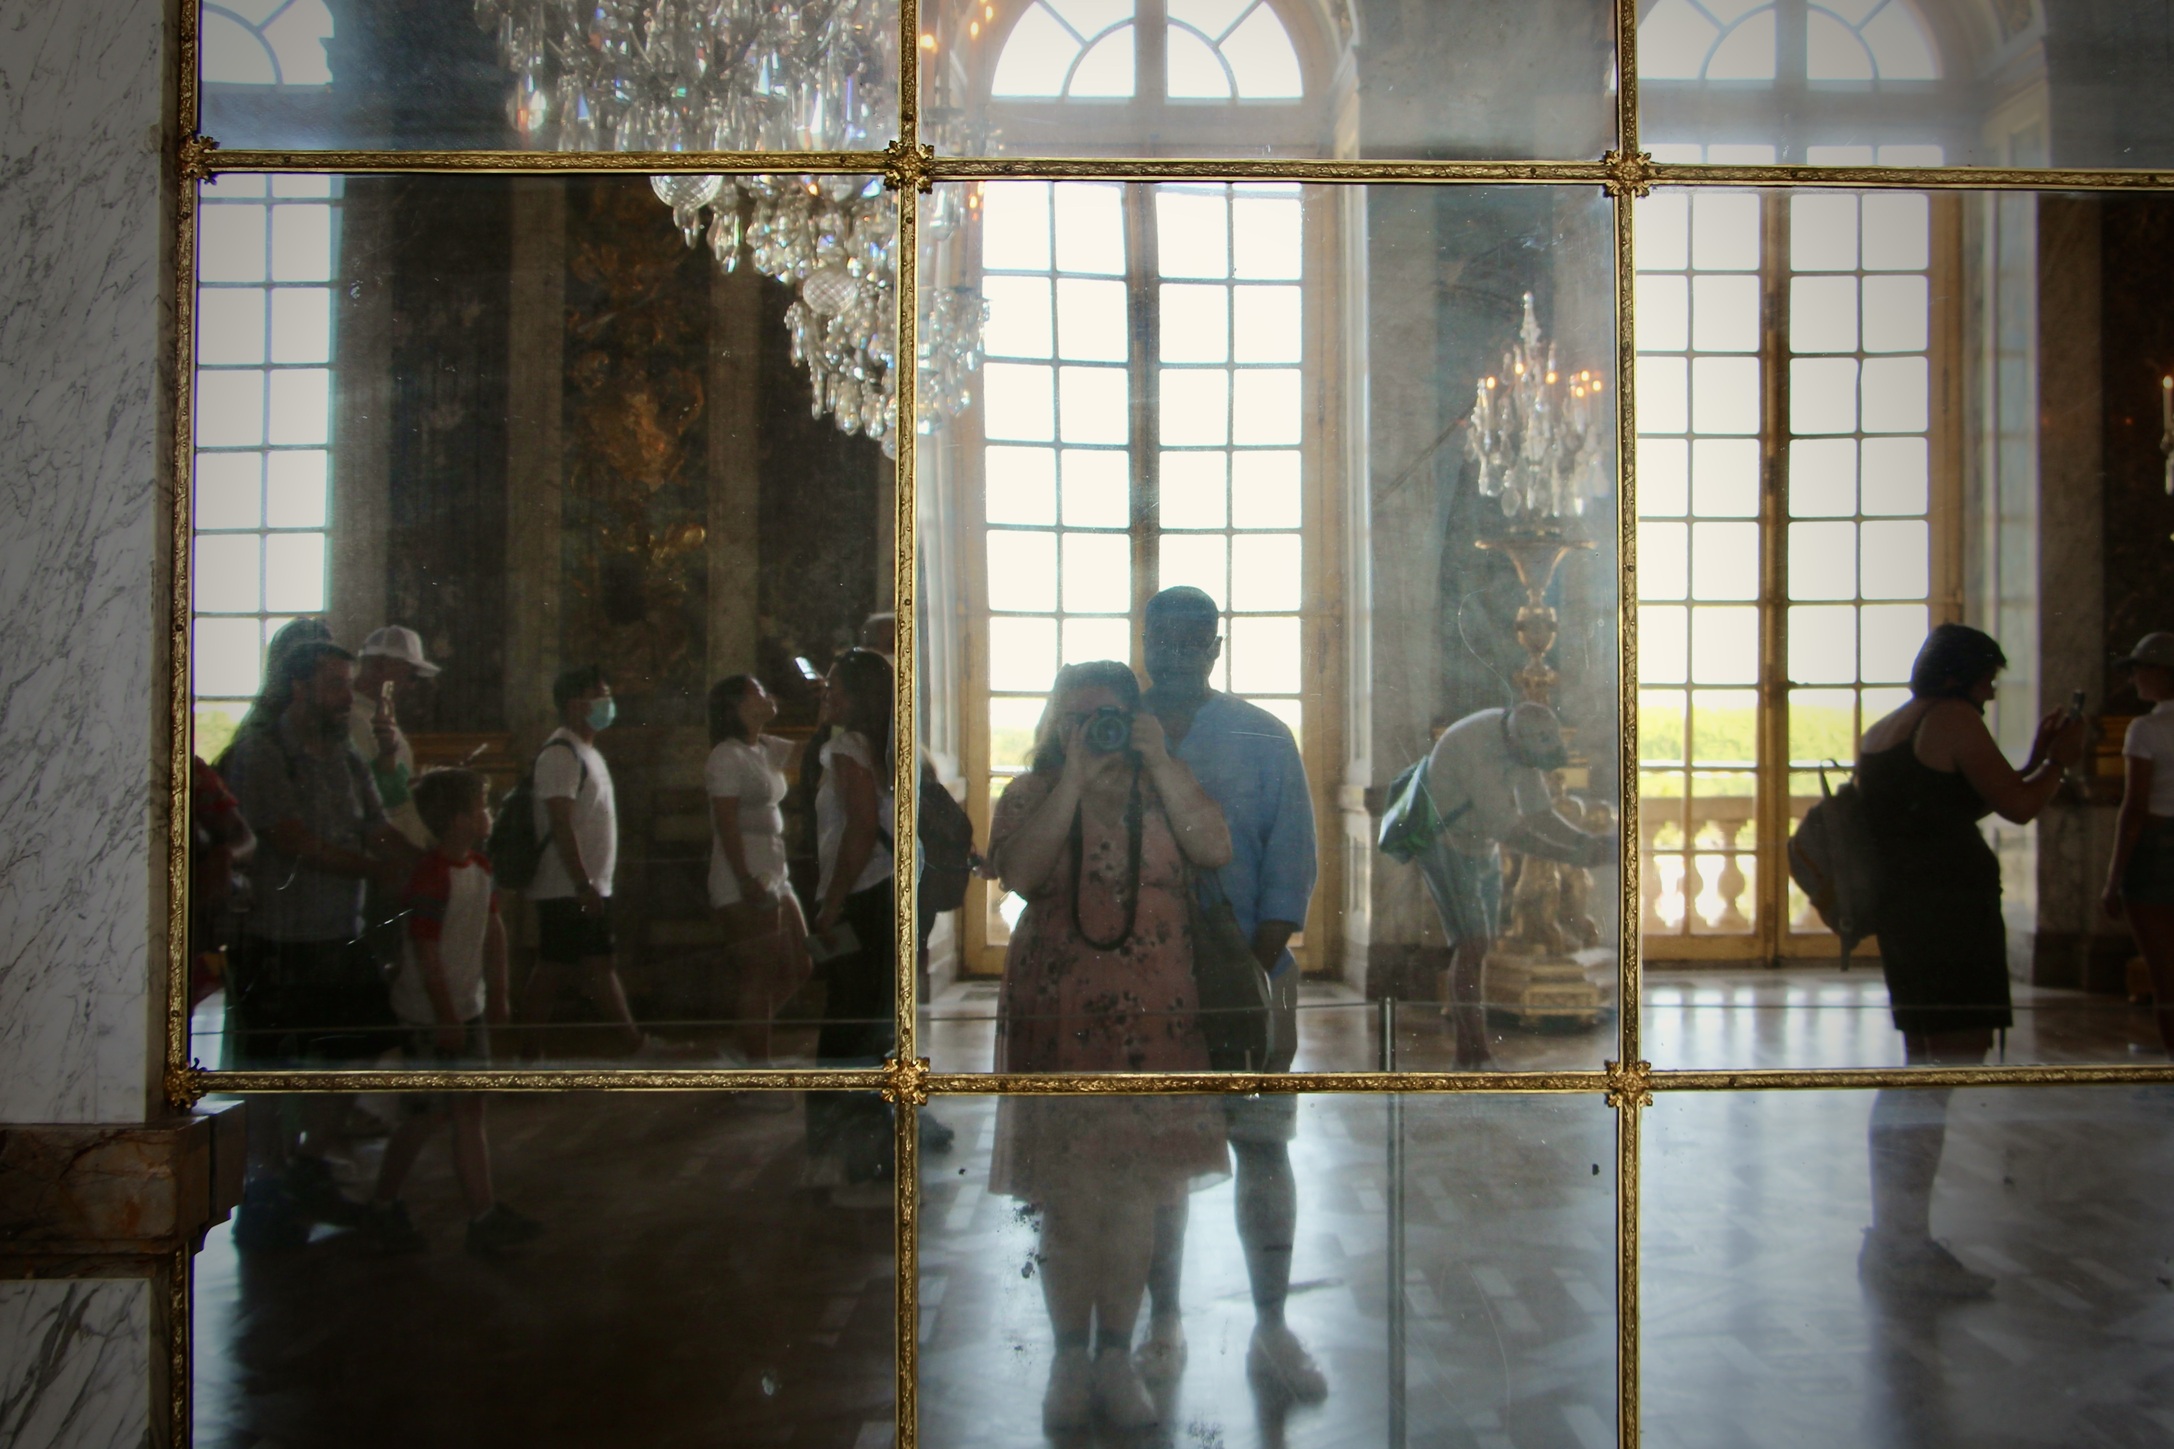 Jalen and Maria pose for a selfie in the Hall of Mirrors in the Palace of Versailles.